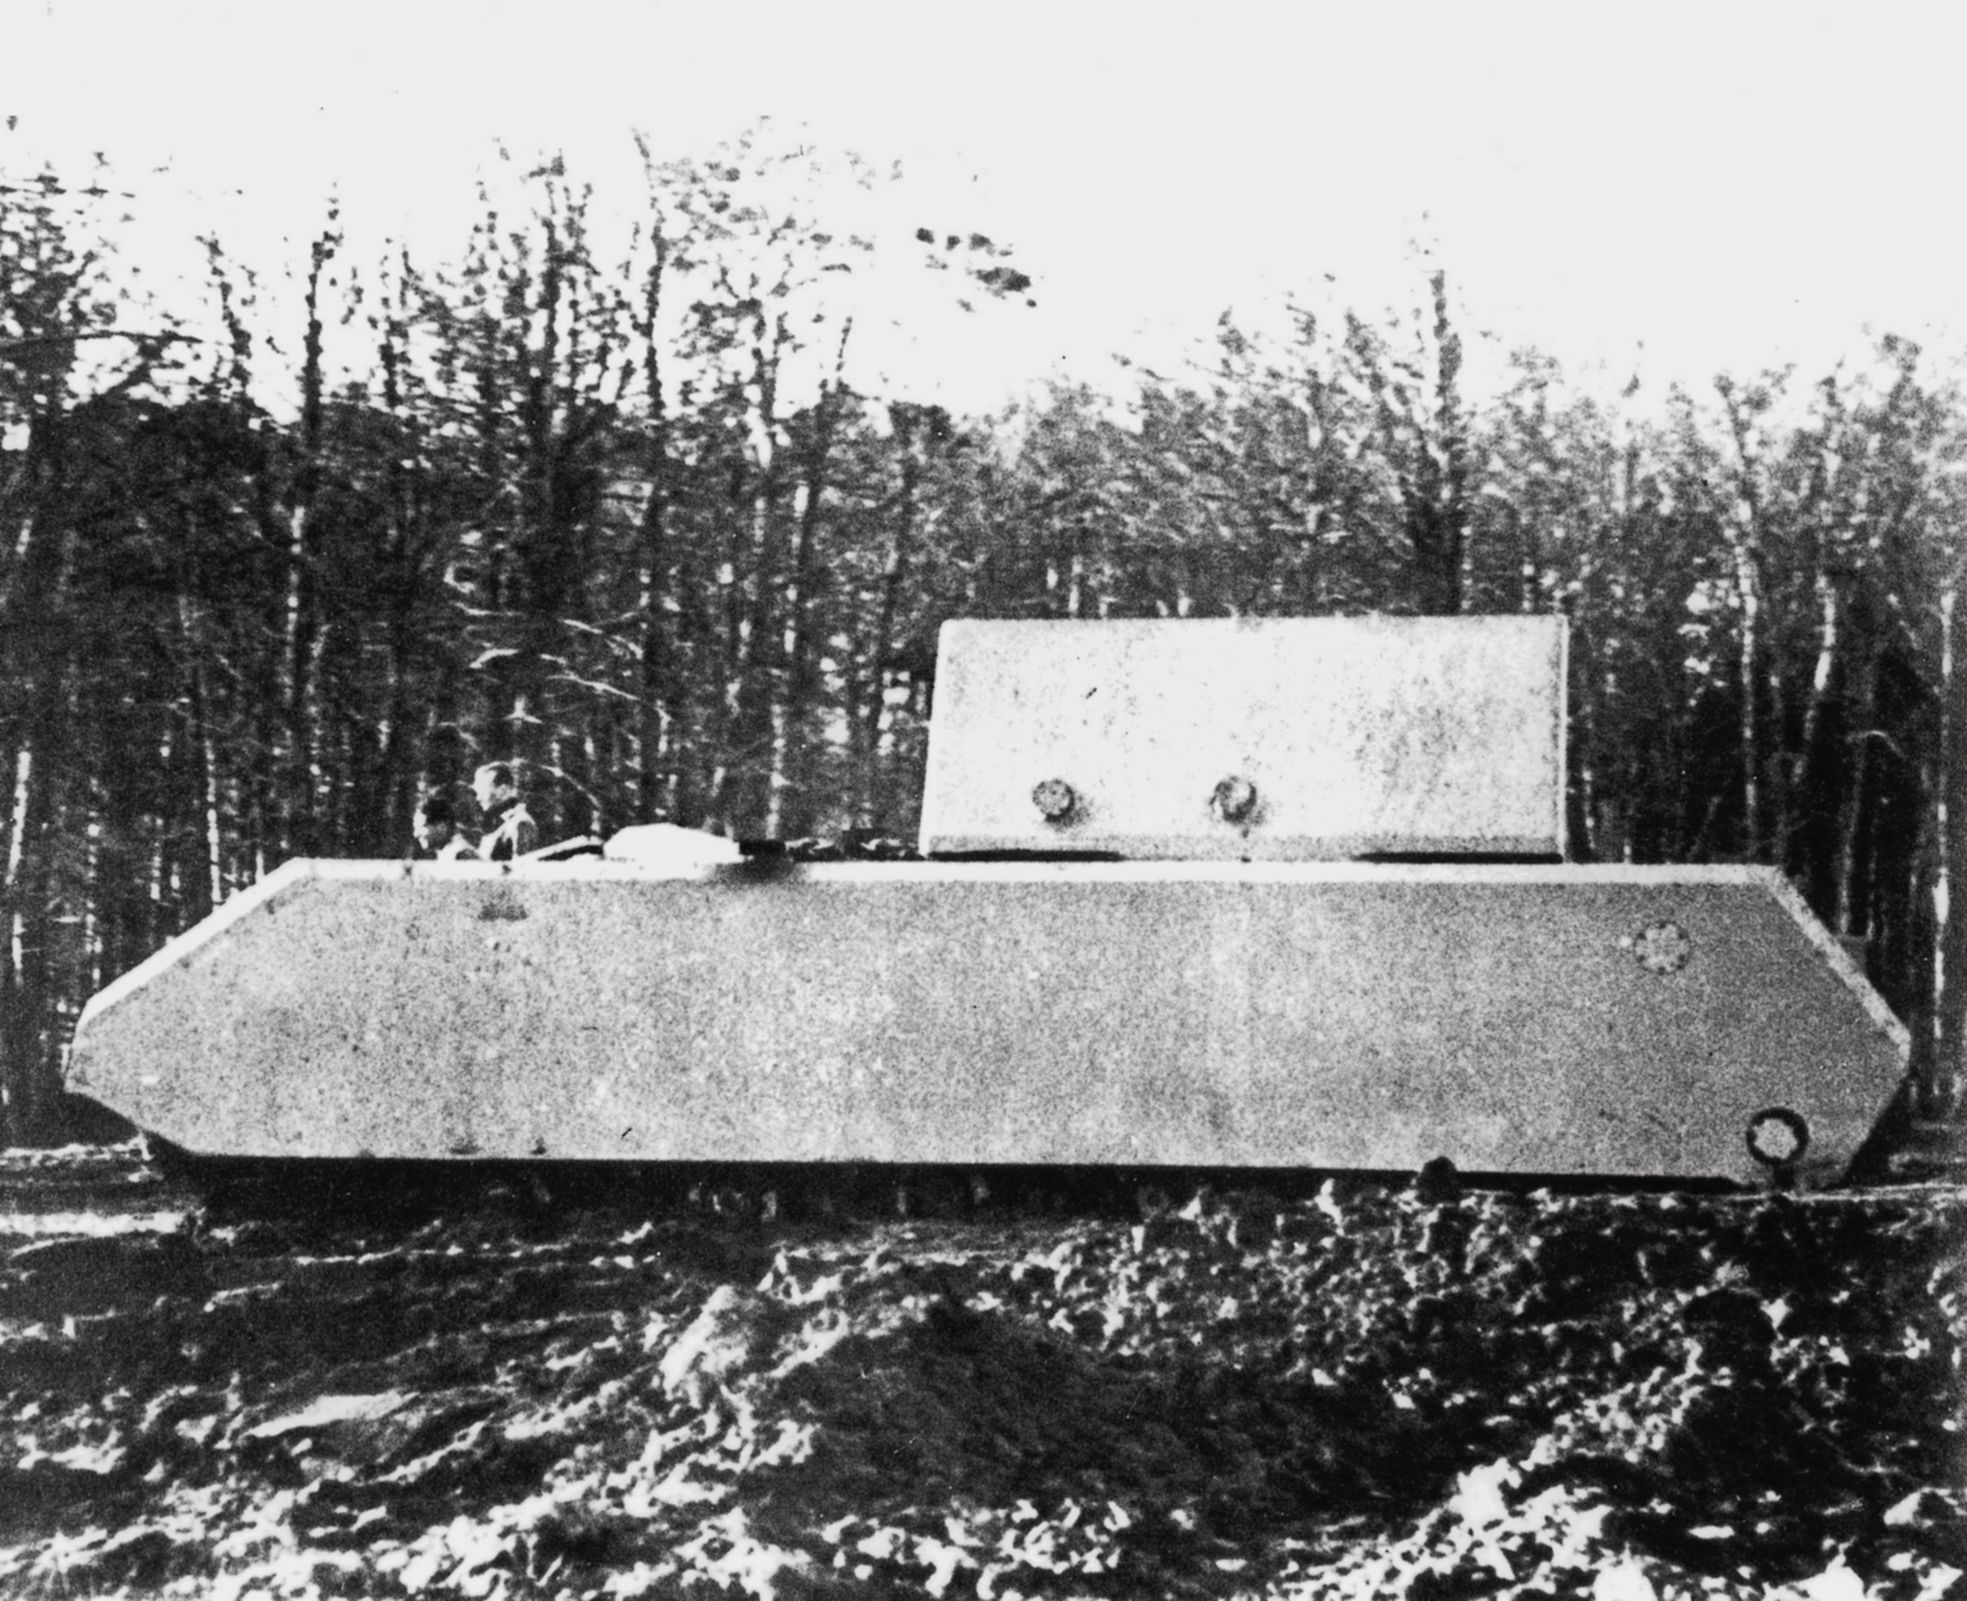 A 1944 prototype of the gigantic Maus, a Nazi supertank conceived by Porsche. Few were completed, and the design was later viewed as a dismal failure.